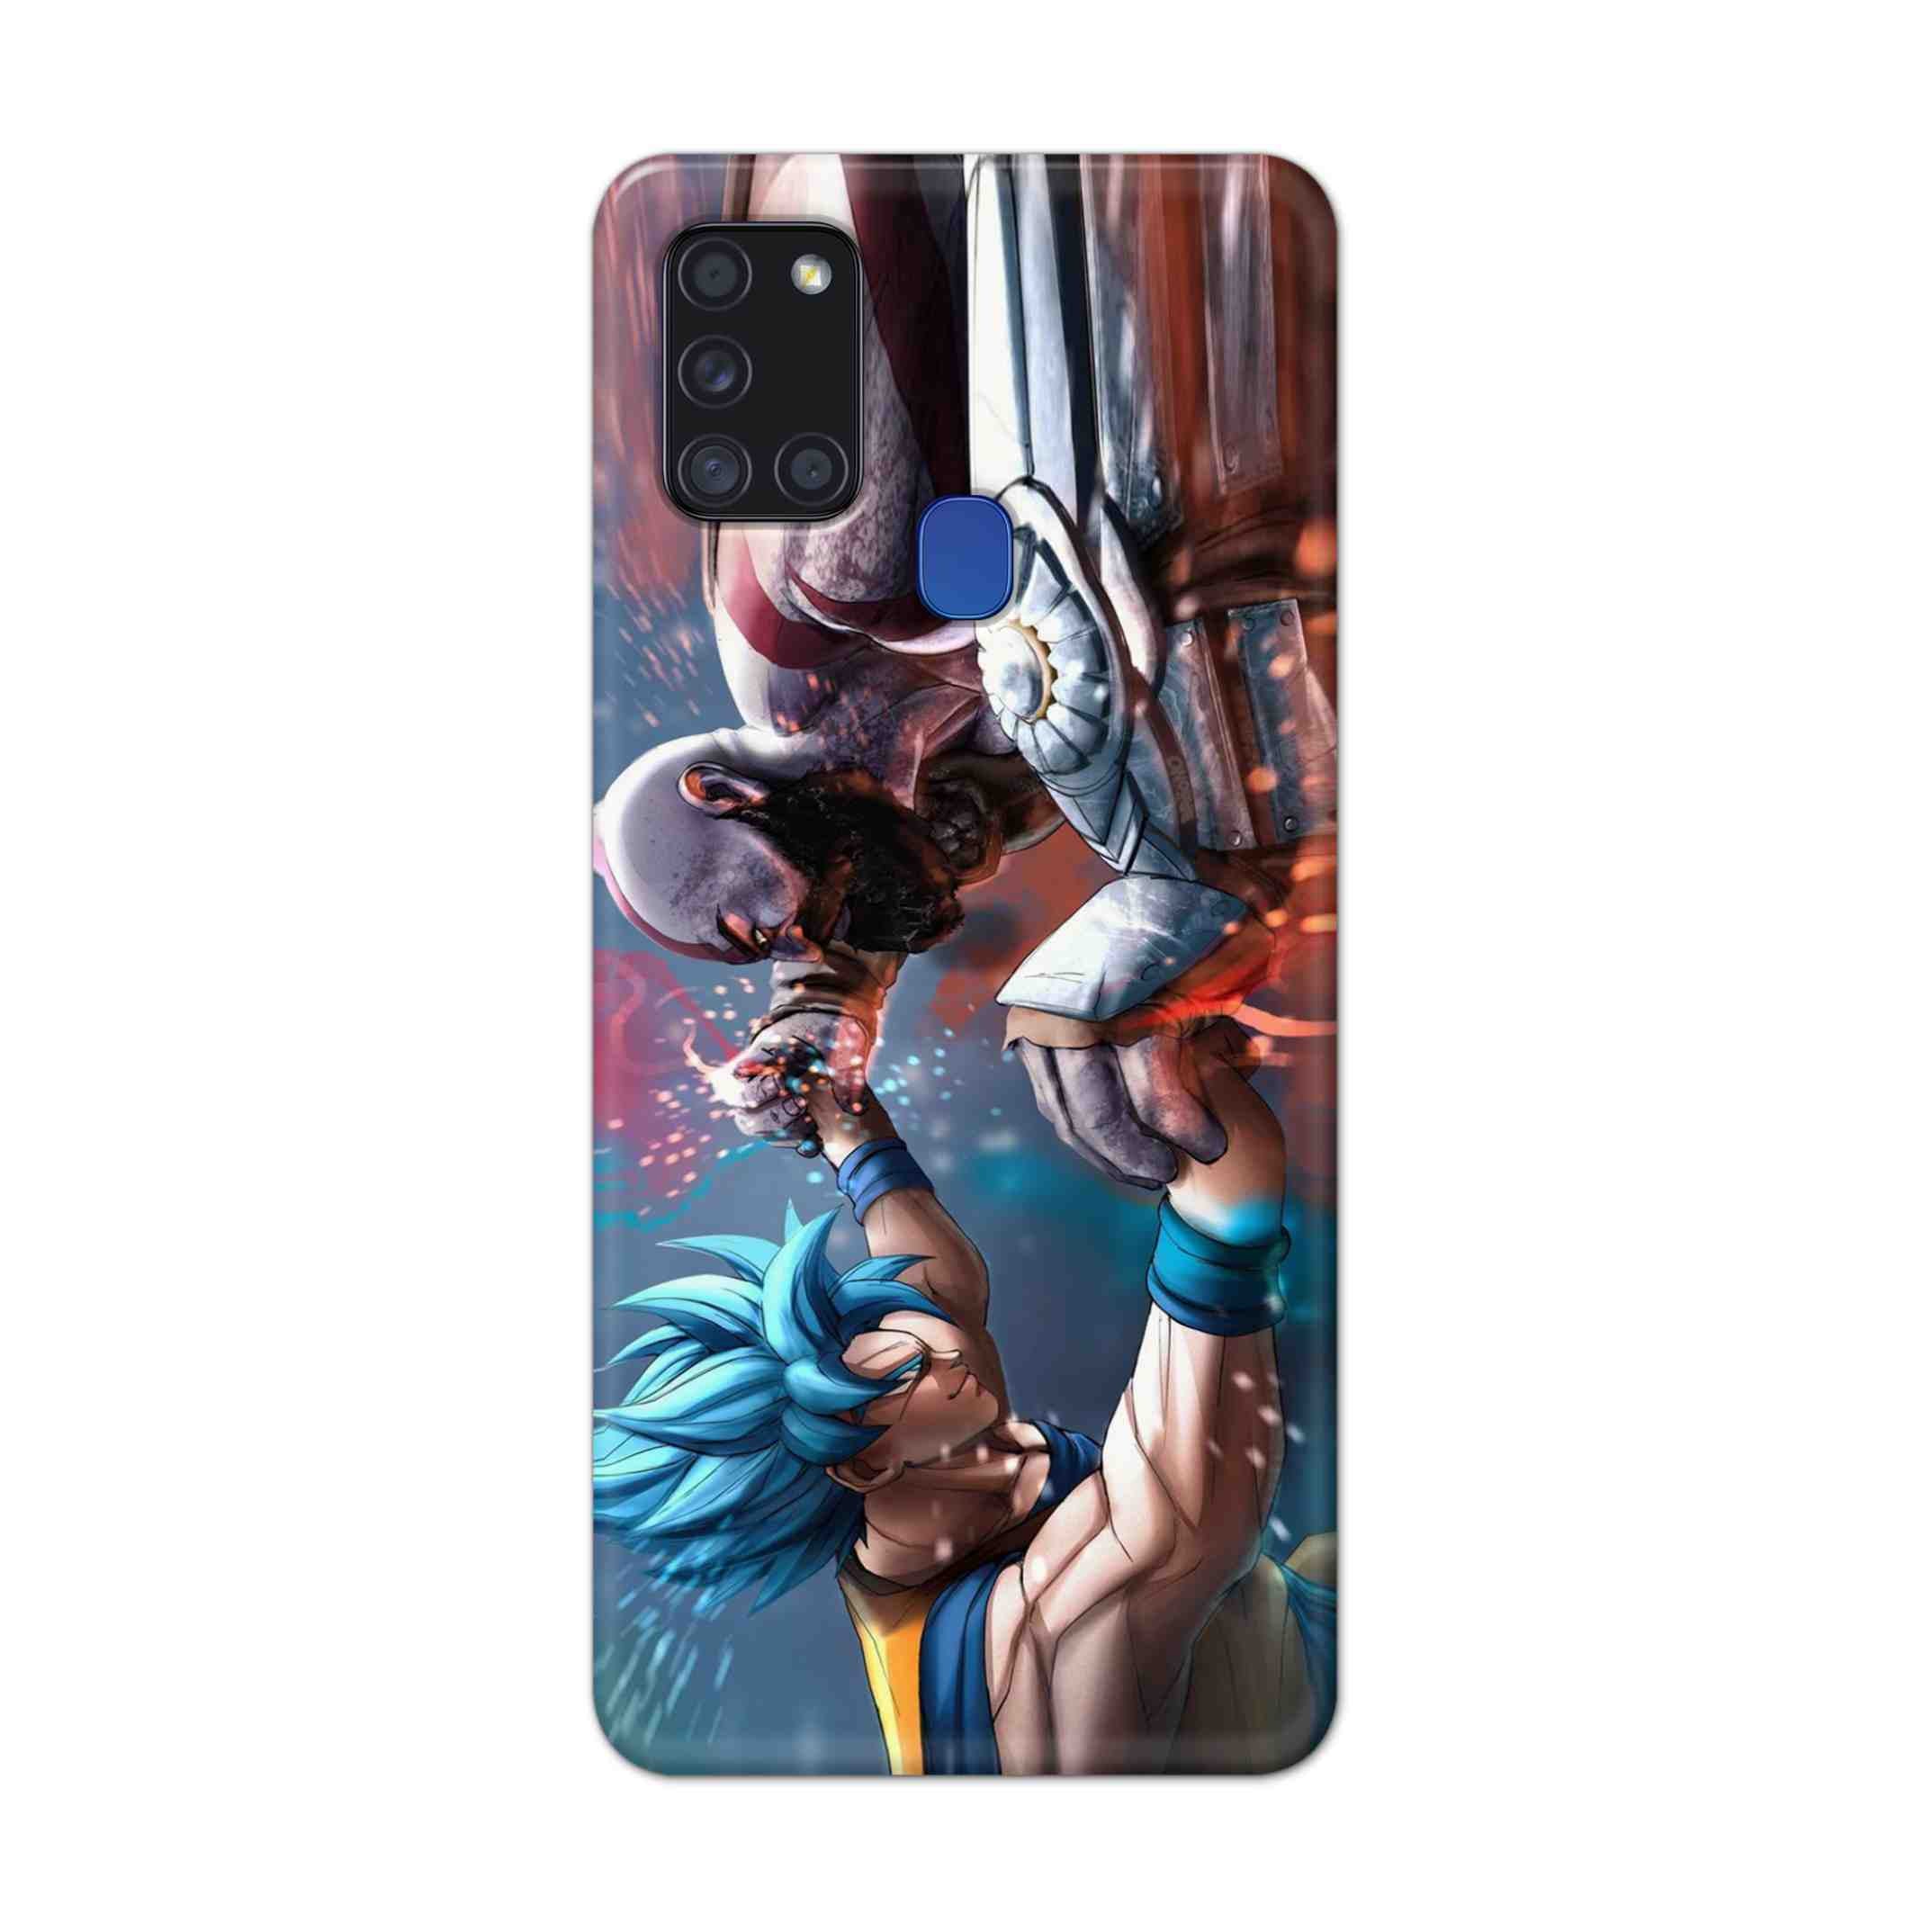 Buy Goku Vs Kratos Hard Back Mobile Phone Case Cover For Samsung Galaxy A21s Online